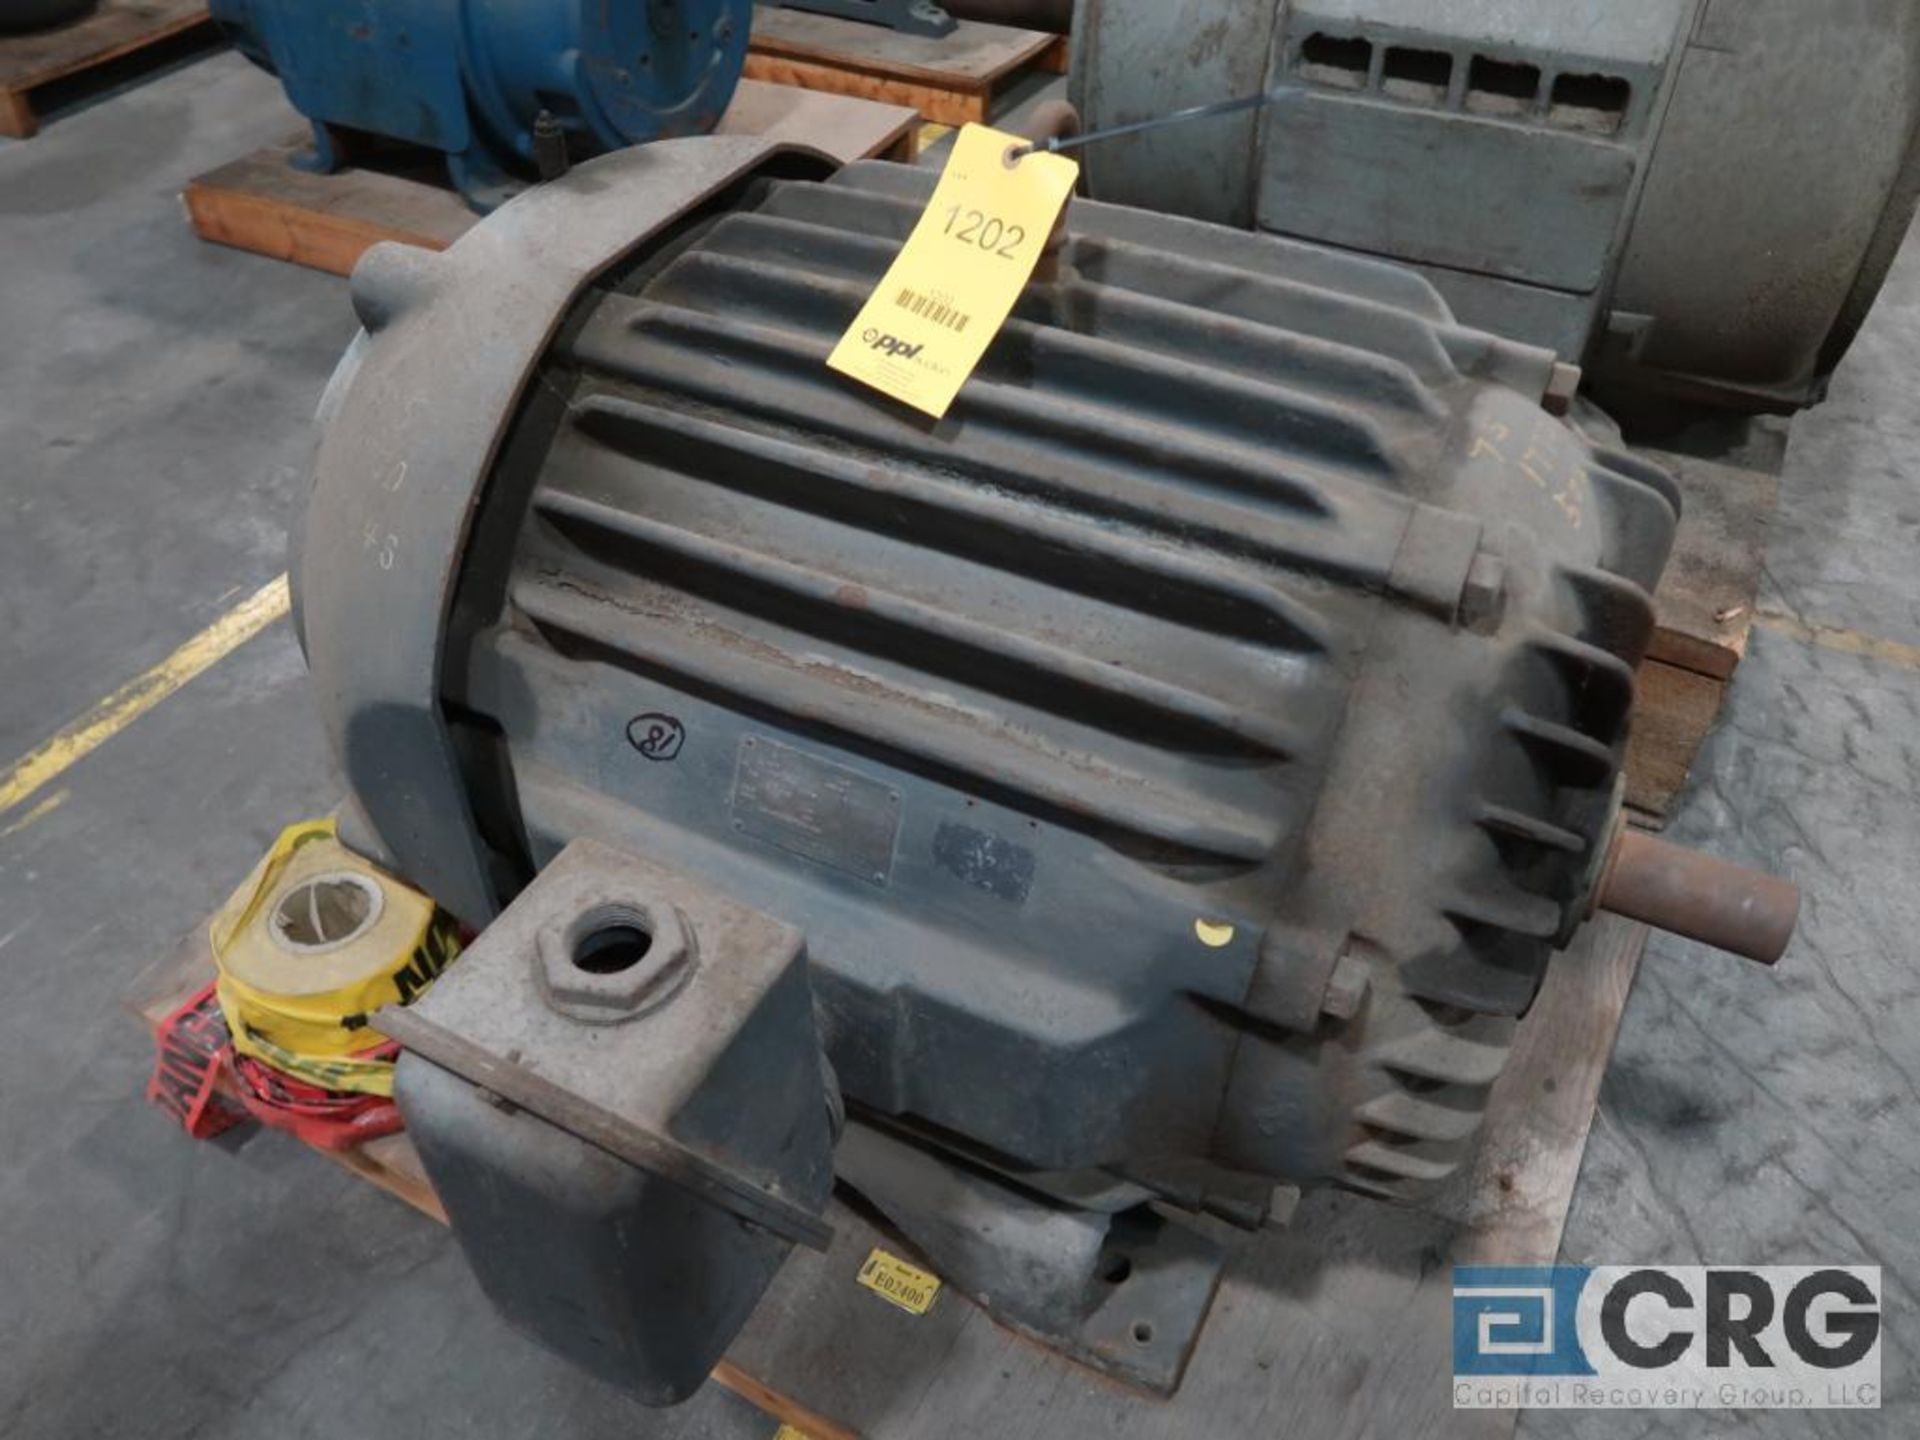 Allis-Chalmers induction motor, 75 HP, 1,770 RPMs, 220/440 volt, 3 ph., 504S frame (Finish